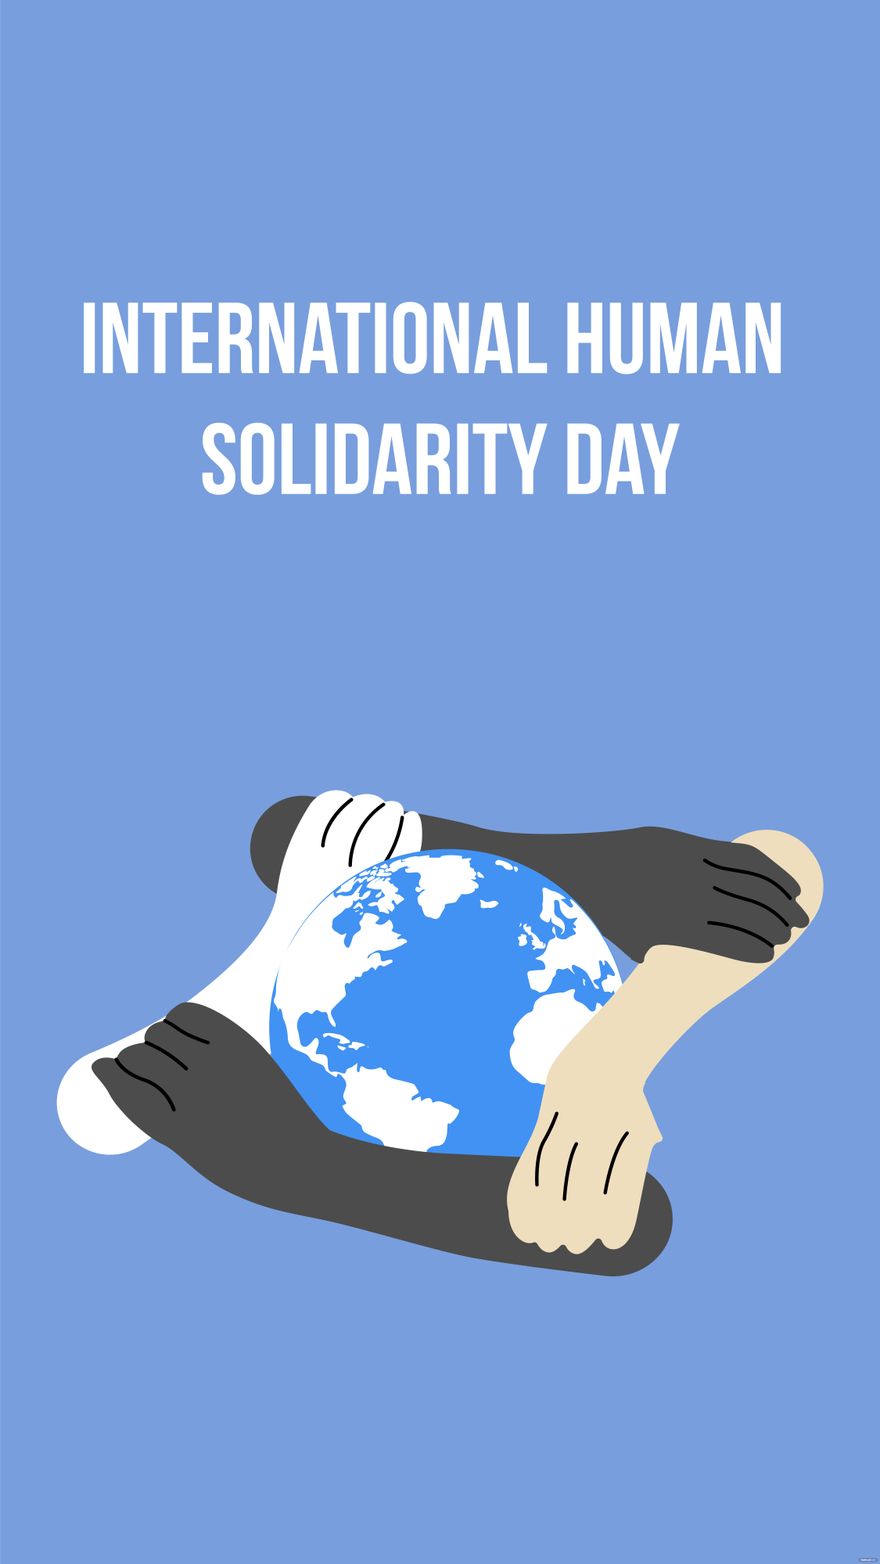 Free International Human Solidarity Day iPhone Background in PDF, Illustrator, PSD, EPS, SVG, JPG, PNG